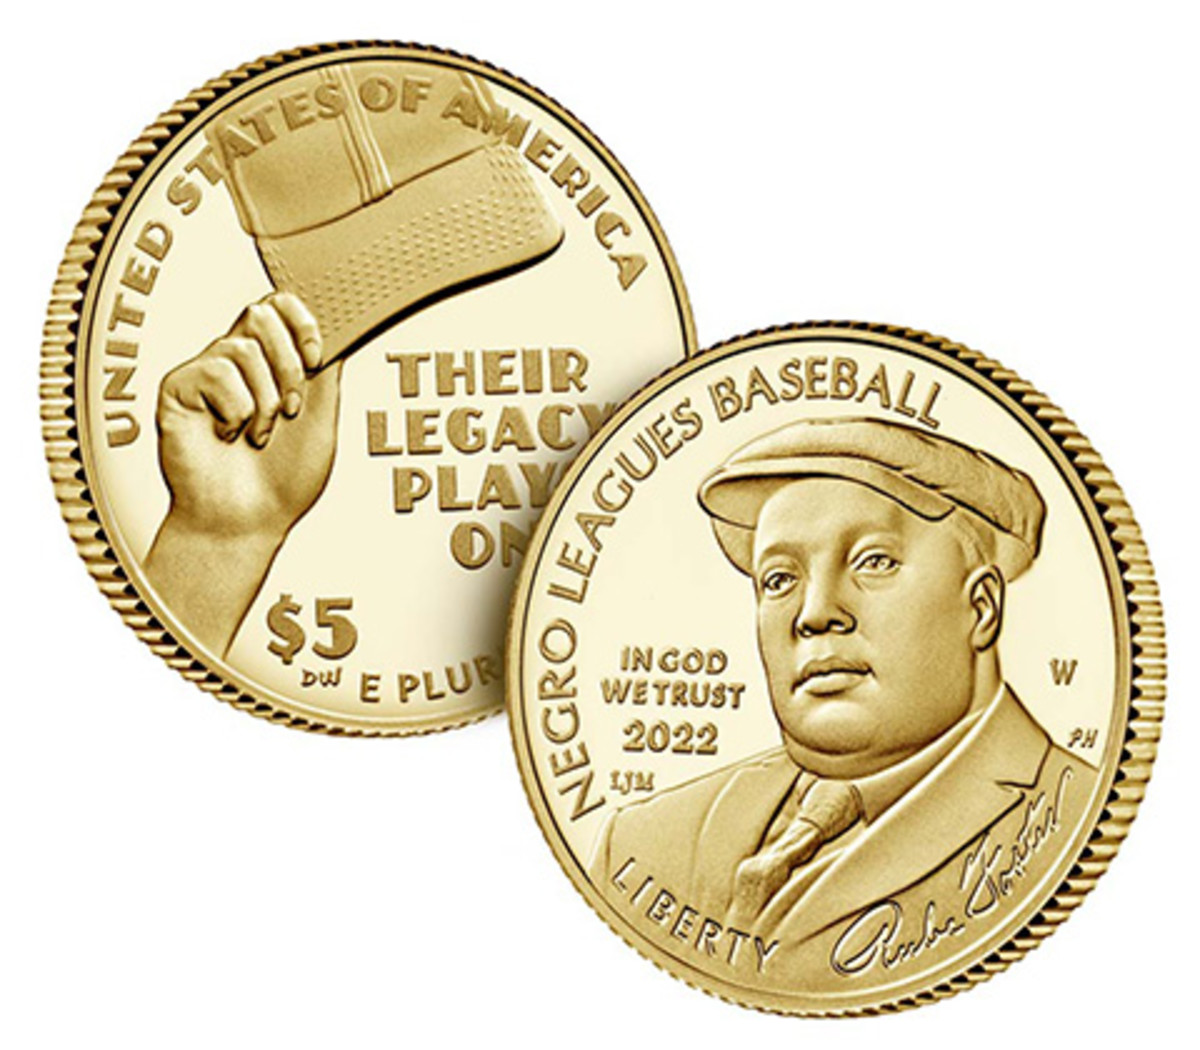 The $5 gold Negro Leagues Baseball design features a portrait of founder Rube Foster on the obverse. The reverse depicts the gesture of tipping one’s cap, an important sign of respect for players. (All coin images courtesy United States Mint.)